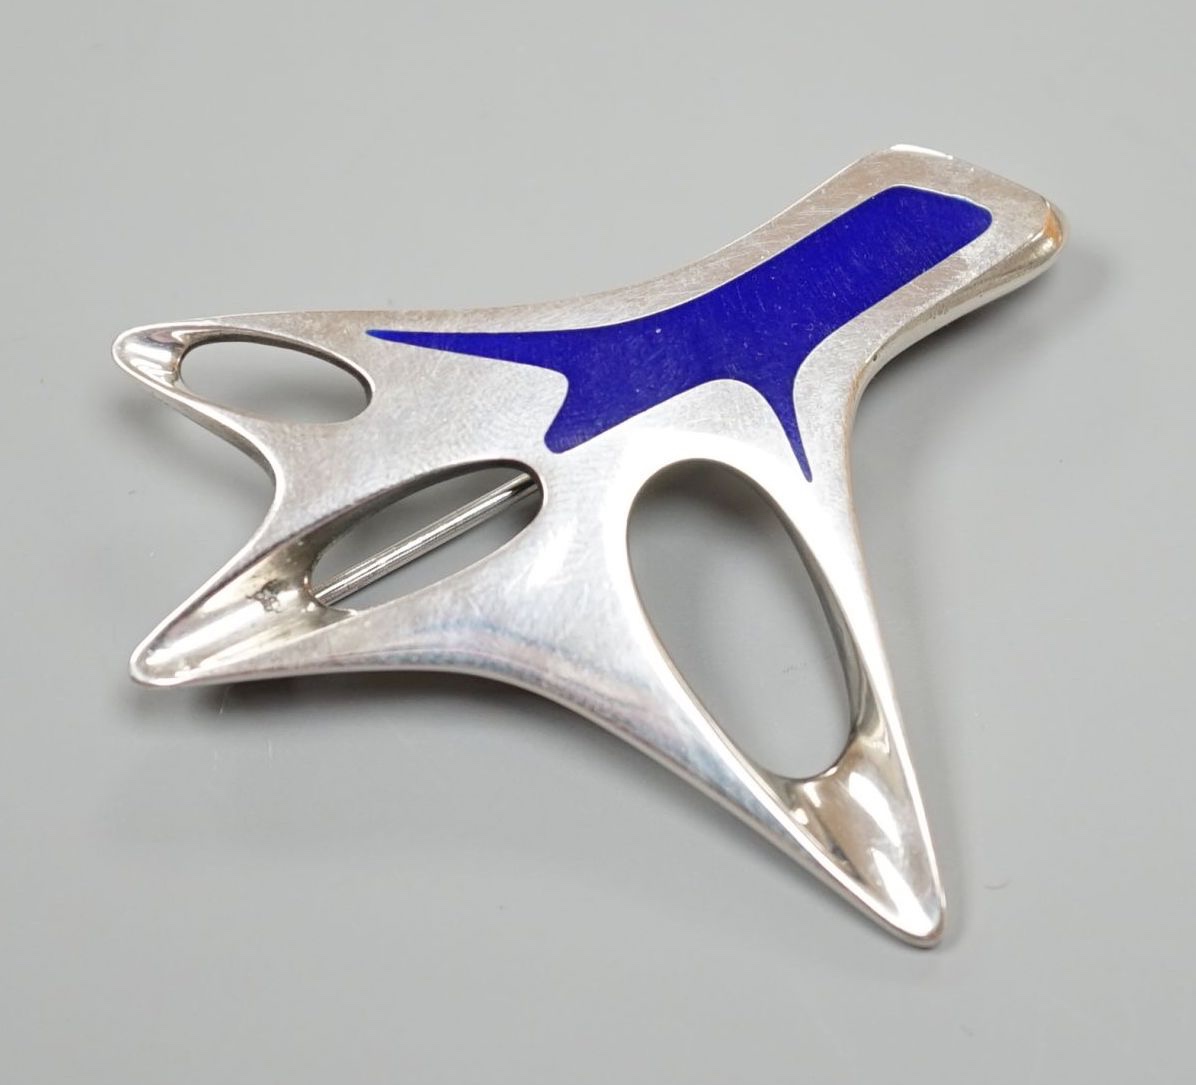 A Henning Koppel for Georg Jensen sterling and blue enamel abstract brooch, no. 323, 60mm (pin a.f.).